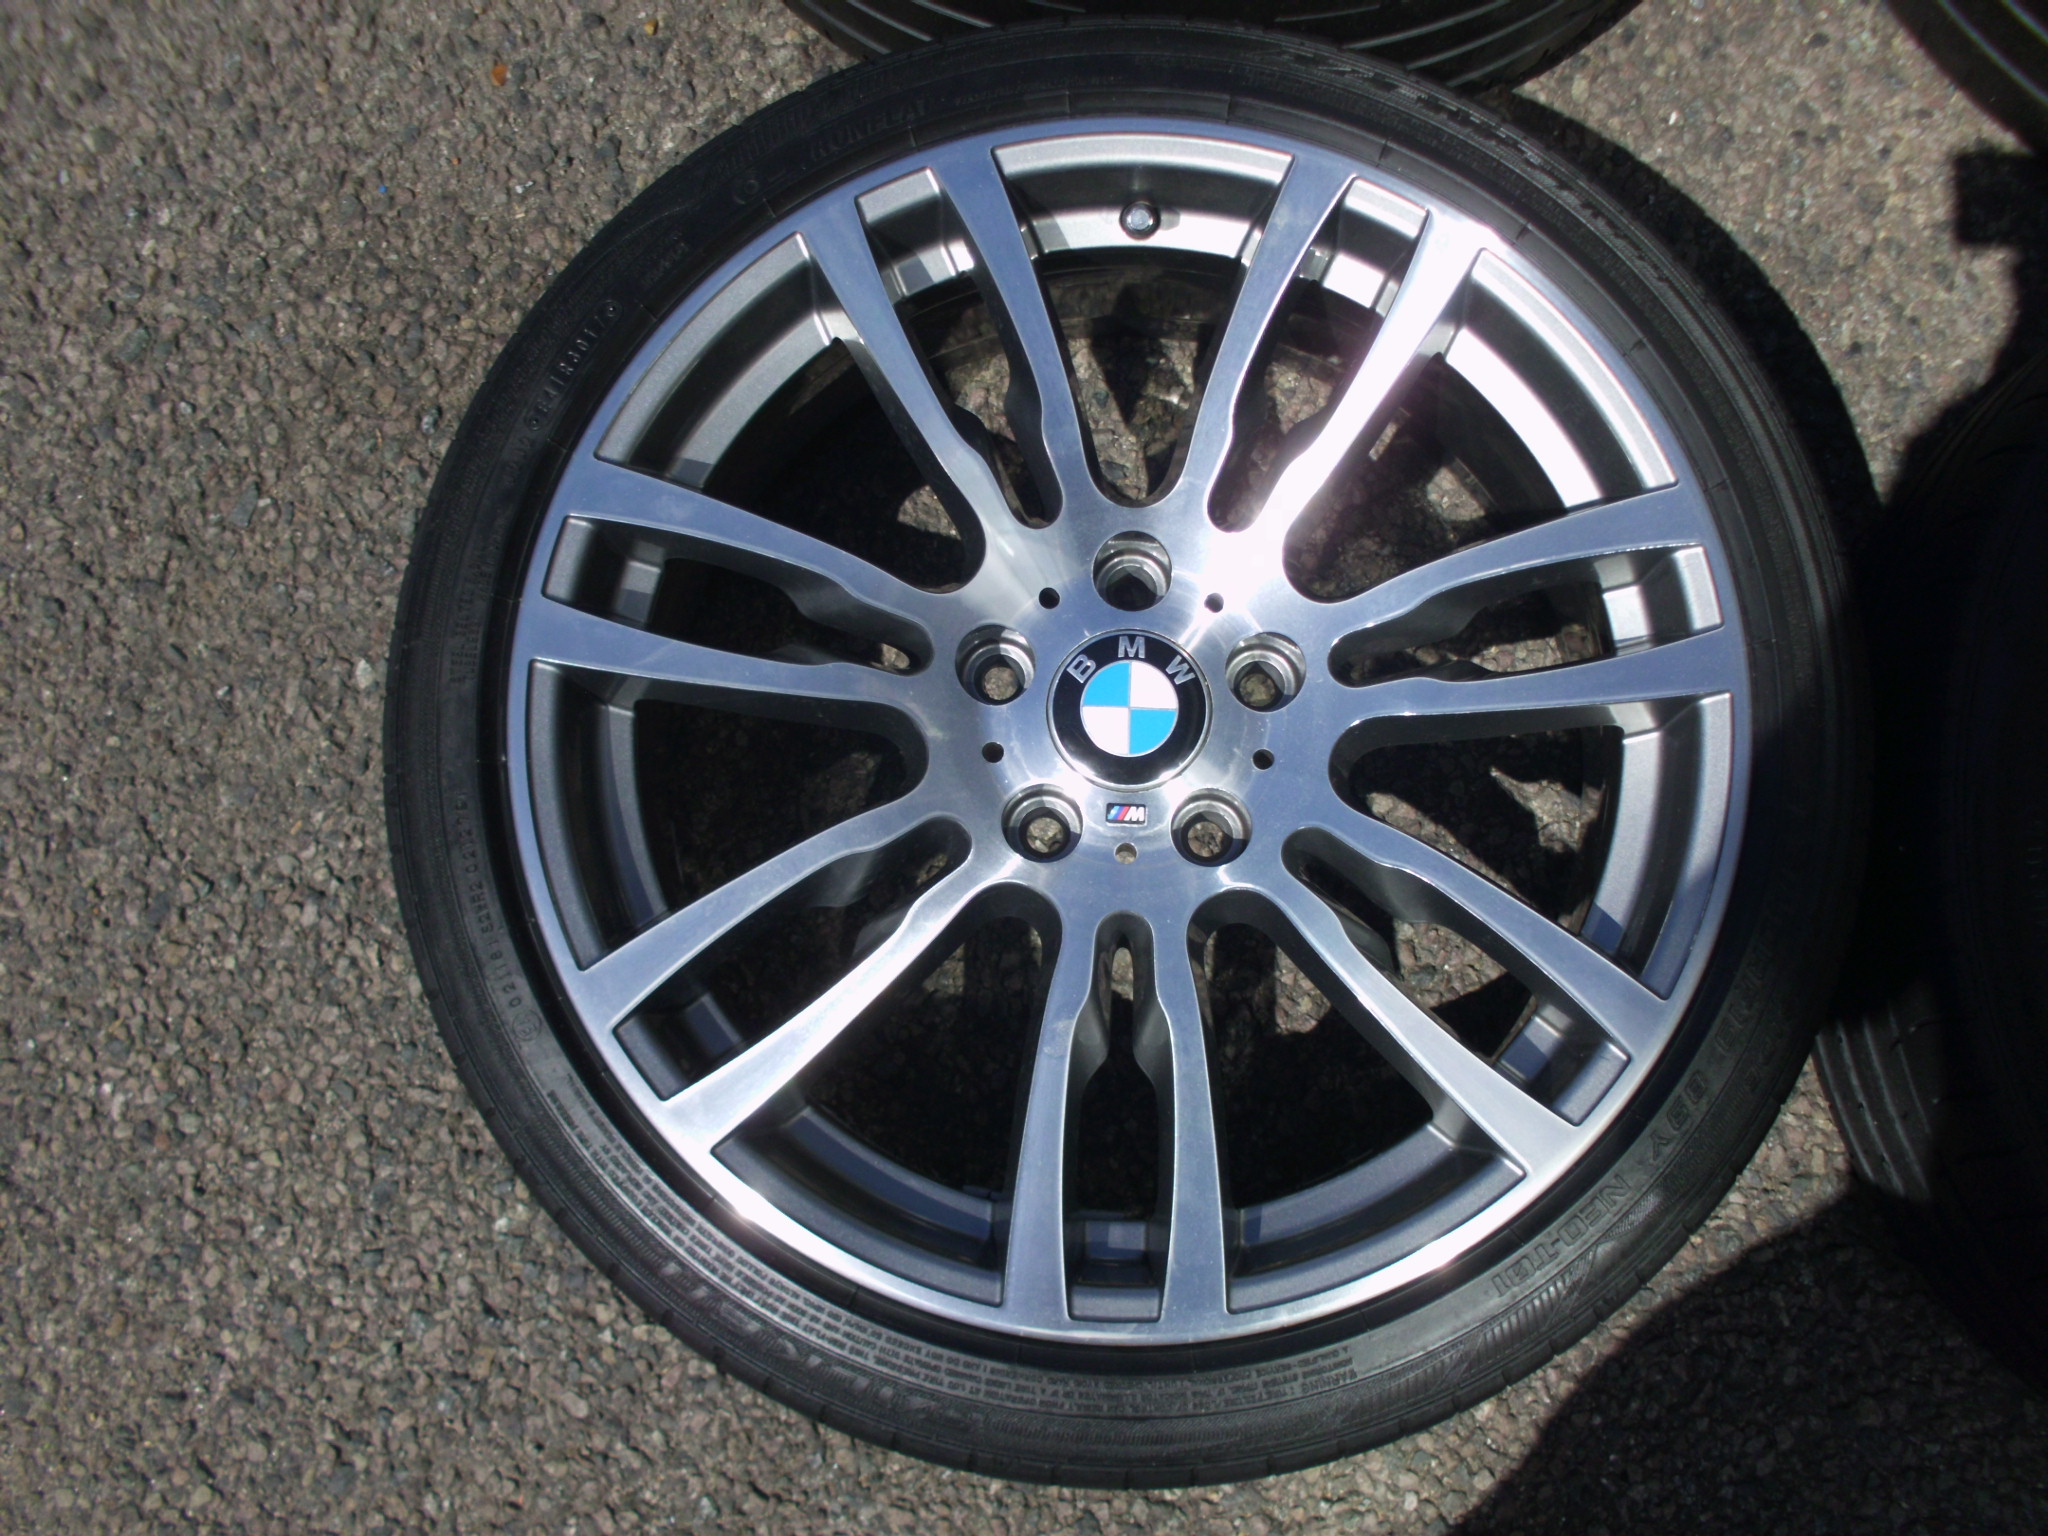 USED 19" GENUINE BMW STYLE 403 F30 M DOUBLE SPOKE ALLOY WHEELS, RECENT REFURB, INC RUNFLAT TYRES